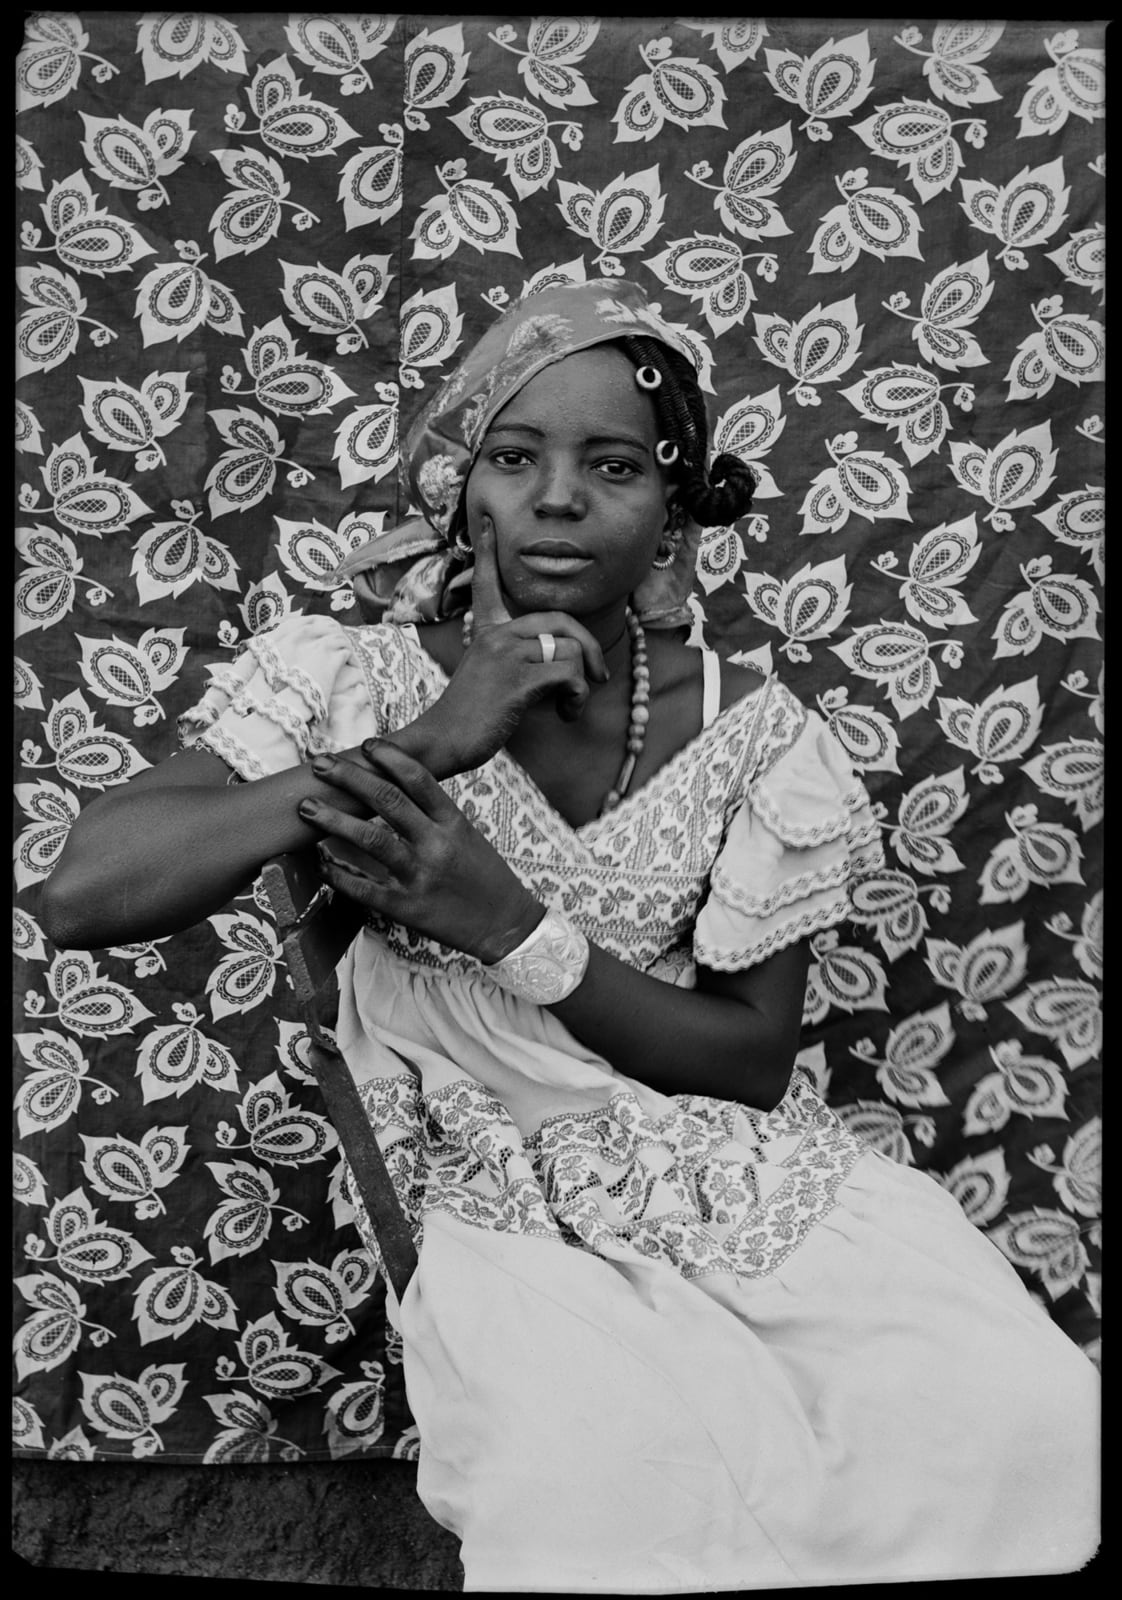 Seydou Keïta Sans titre/ Untitled (00126-MA.KE.001 ) , 1956-1959 Posthumous Gelatin black and white silver print on cartoline paper 280g 60 x 50 cm (23 5/8 x 19 5/8 in.) Edition of 10 + 2 AP Posthumous Gelatin black and white silver print on cartoline paper 280g back-mounted on Aluminium 1mm 162 x 122 cm (63 25/32 x 48 1/32 in) Edition of 5 + 2 AP